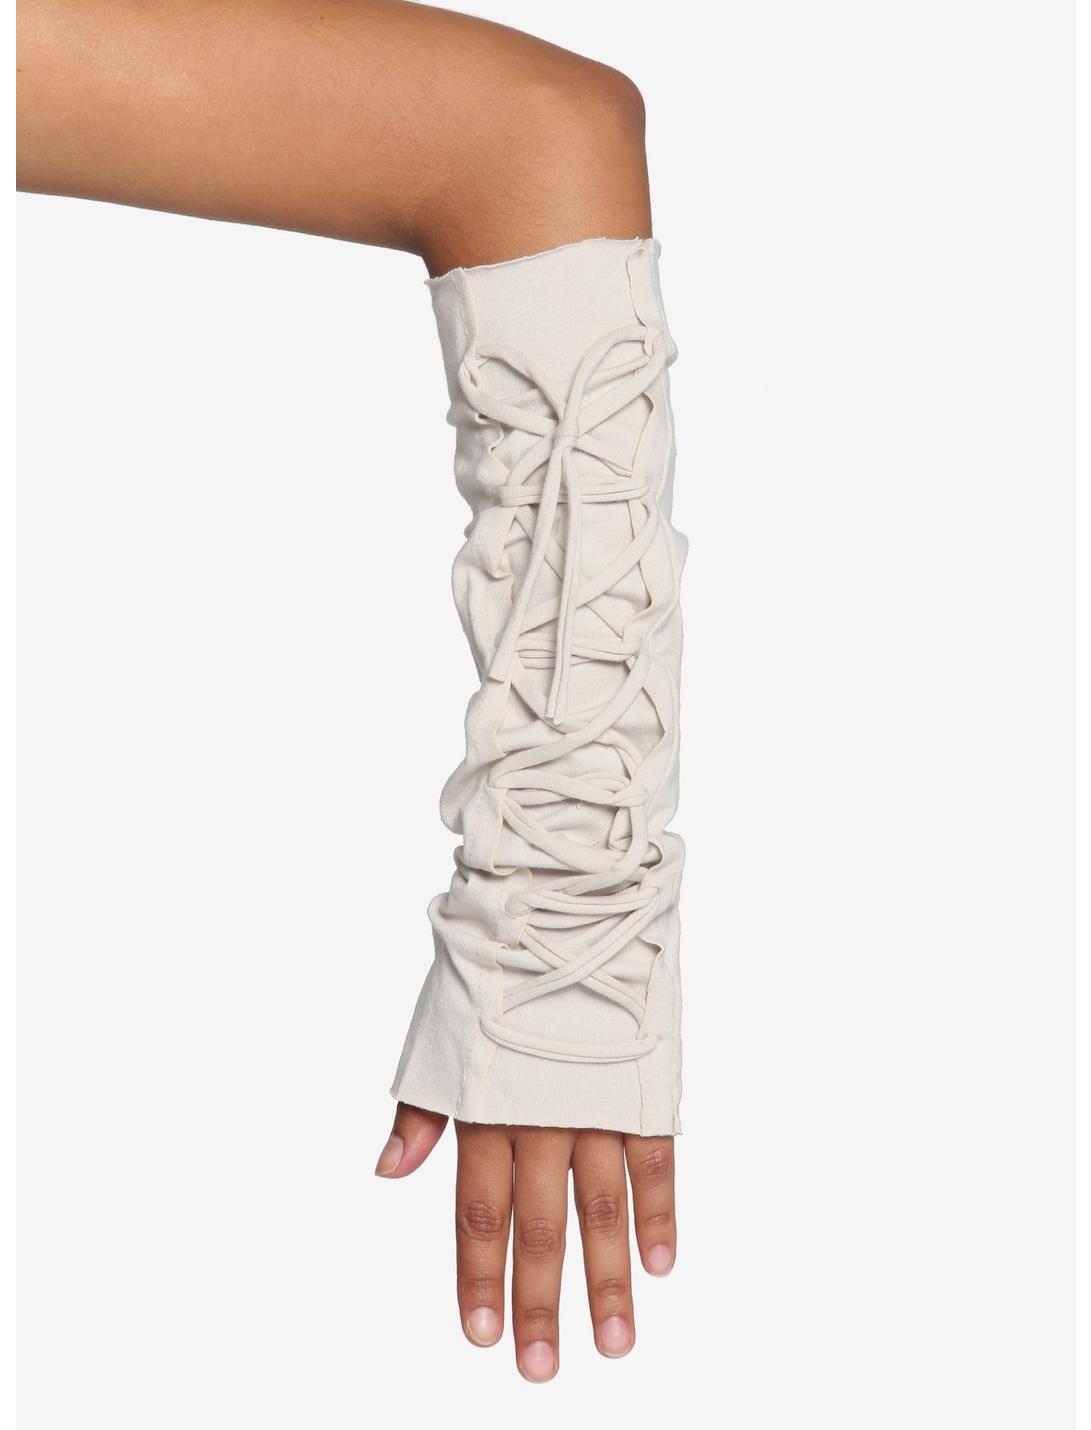 Cream Lace-Up Arm Warmers, , hi-res